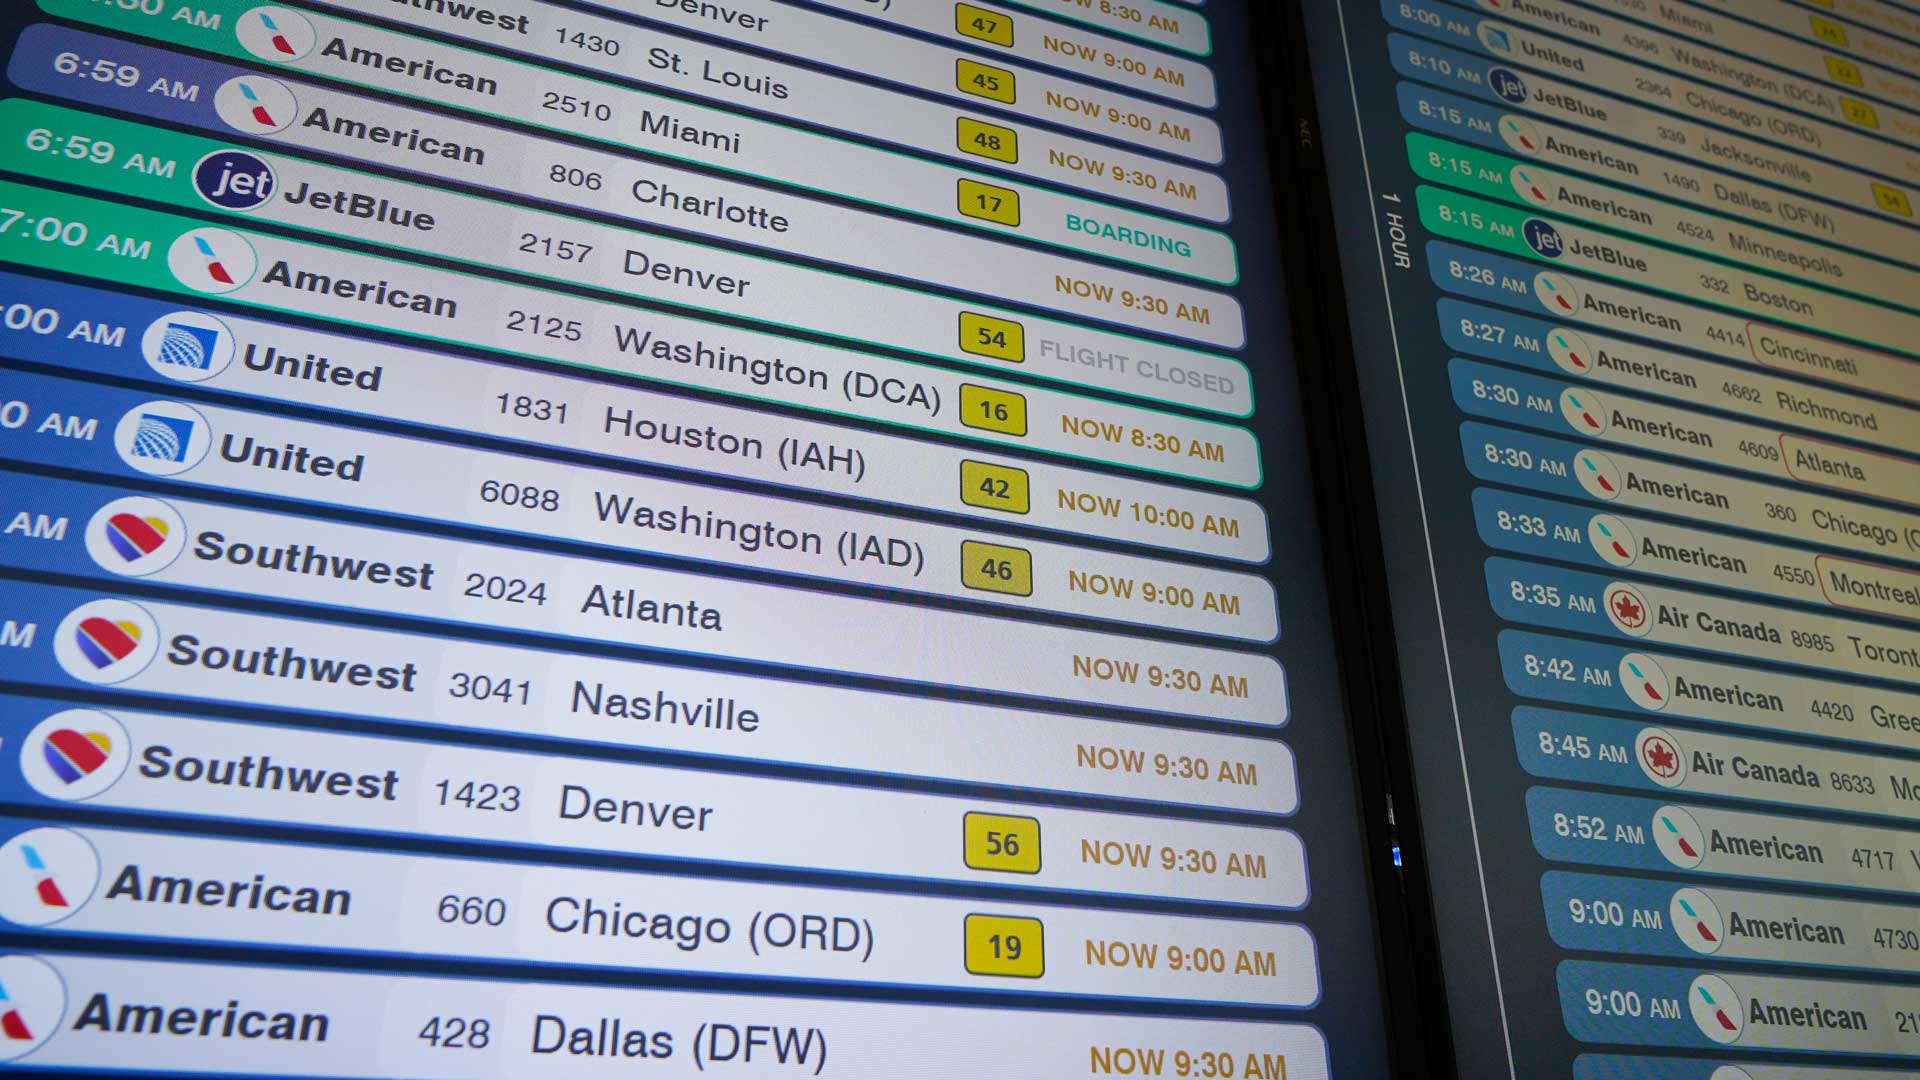 NYC area airports and passengers impacted by FAA ground stop delays